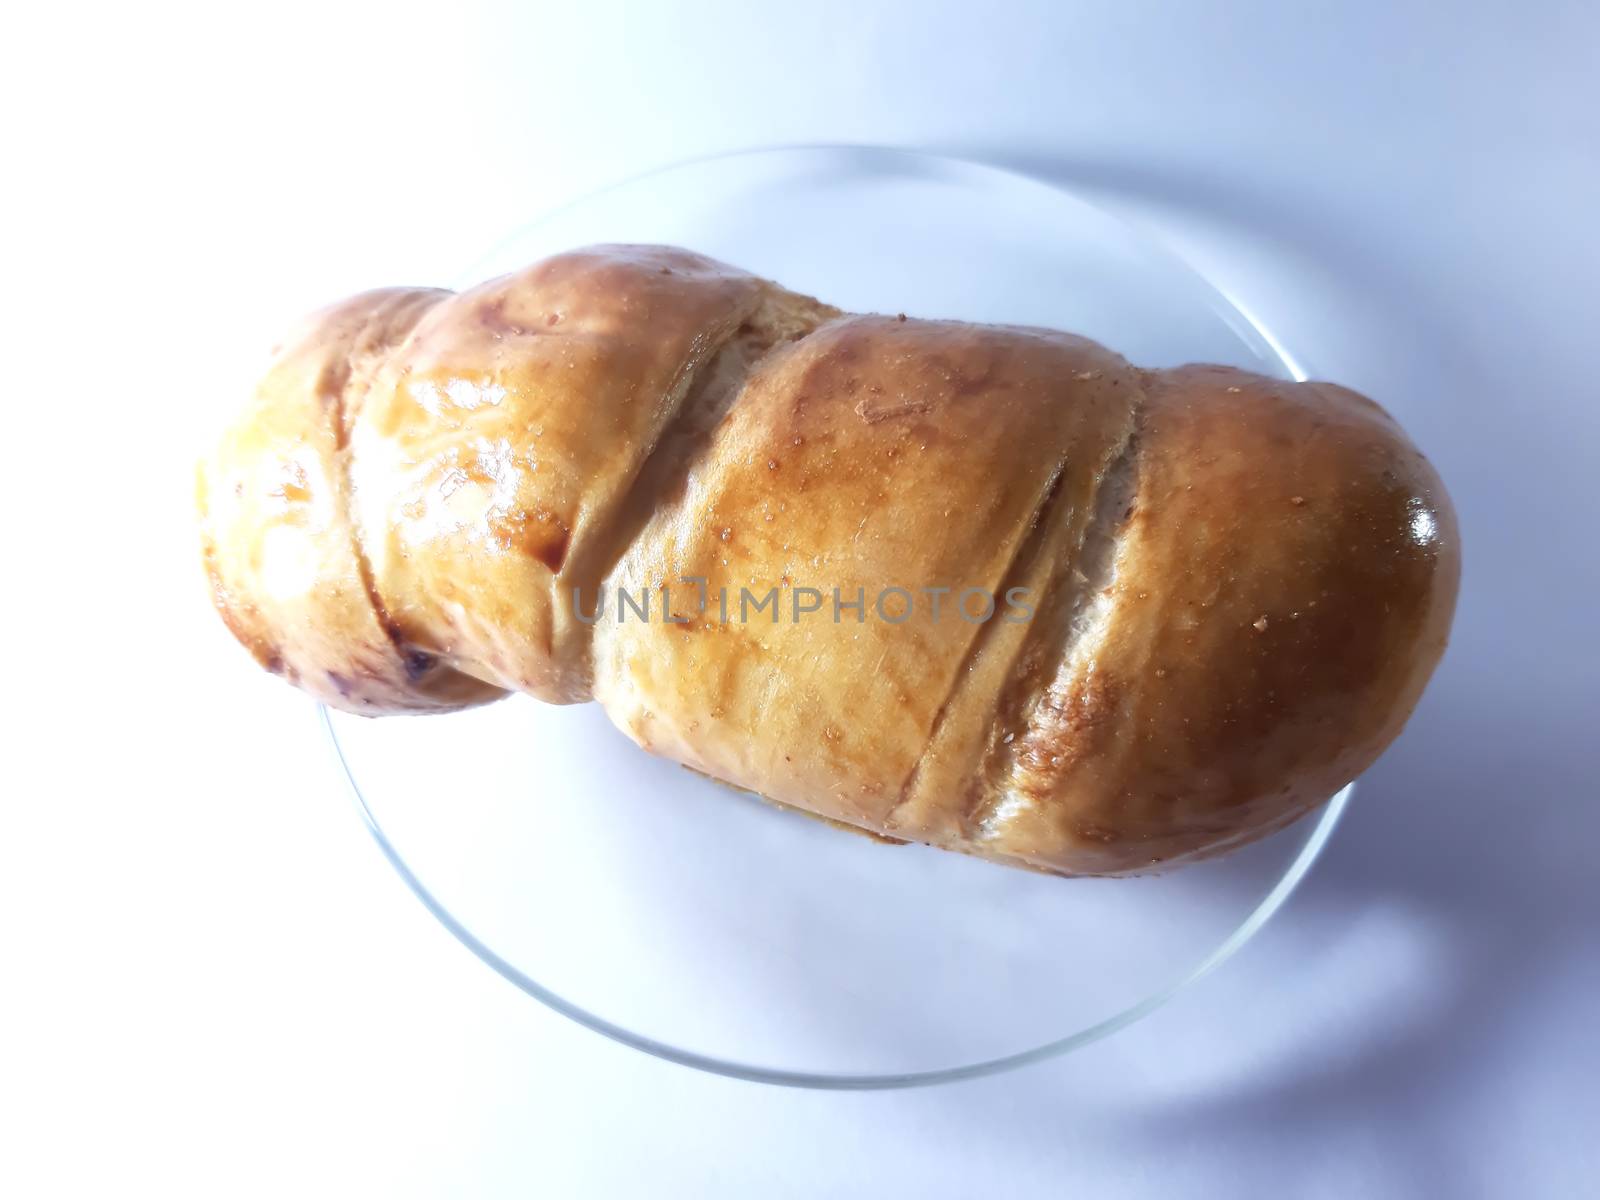 Photo bun with nipples inside. Fast food. Dough and meat ingredient. Bakery products.